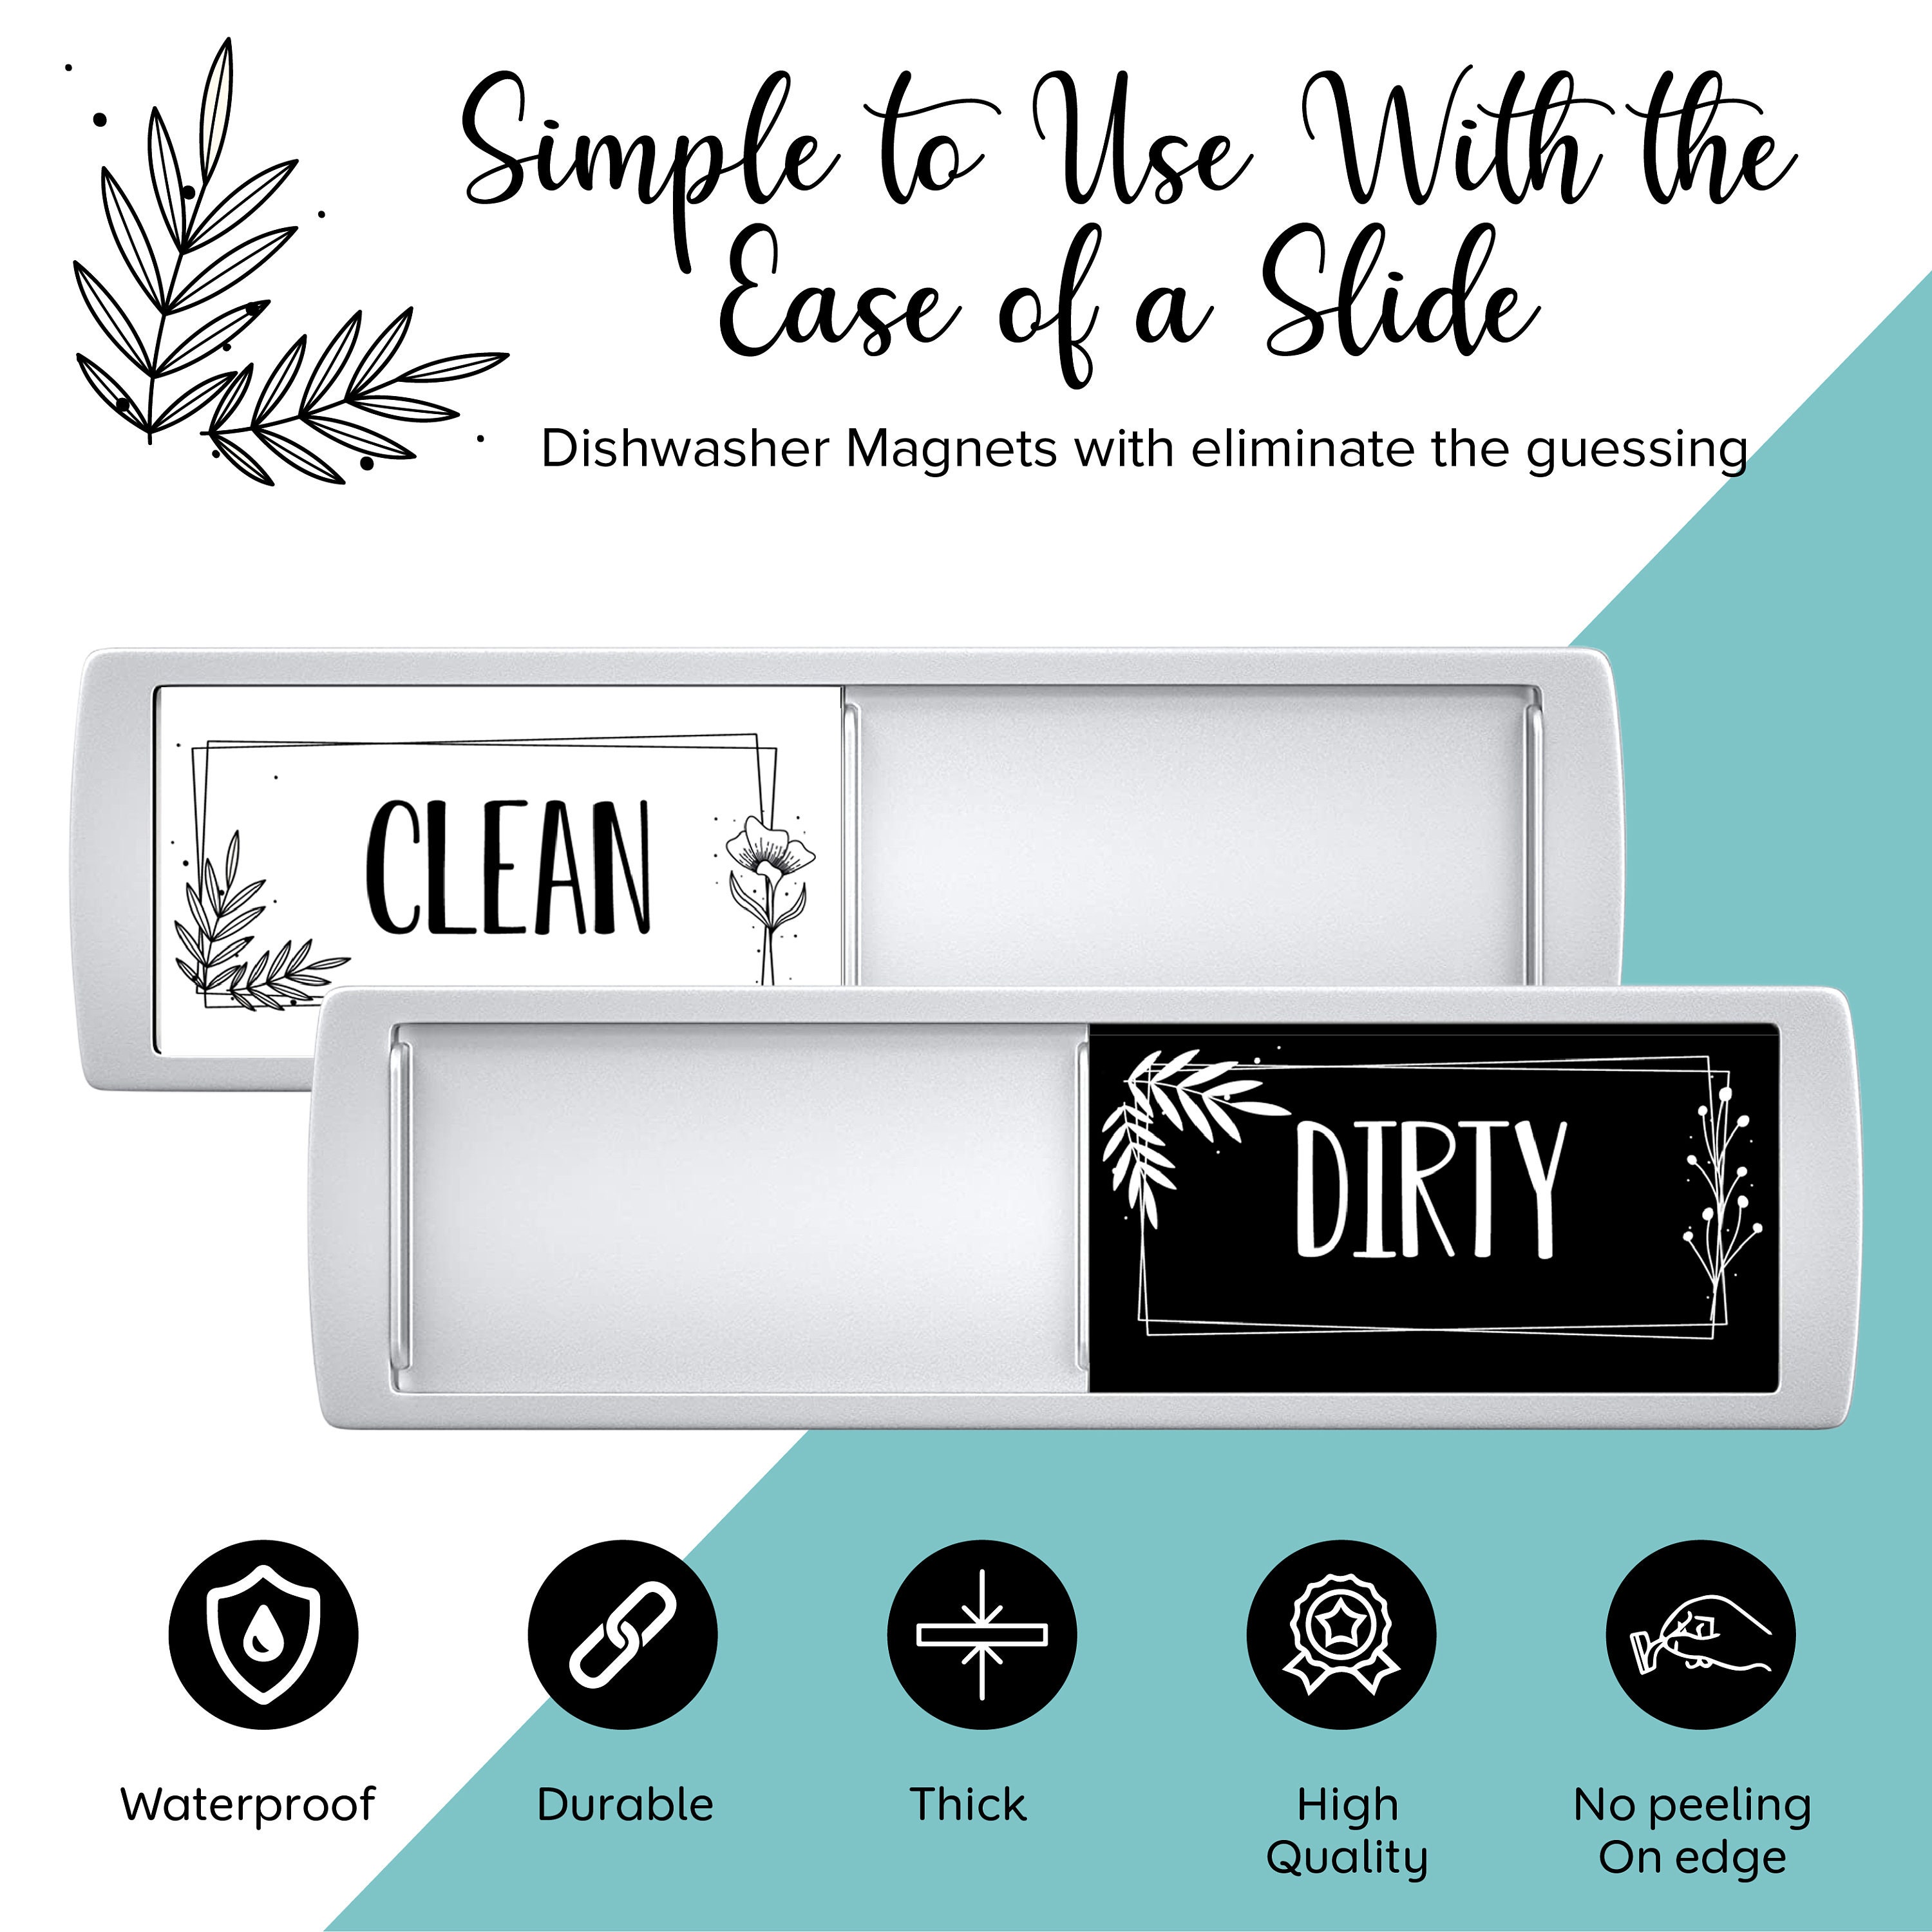 Sorry We're Dirty/Come in We're Clean - High Quality Thick Dishwasher Magnet  Sign That Will Never Fall